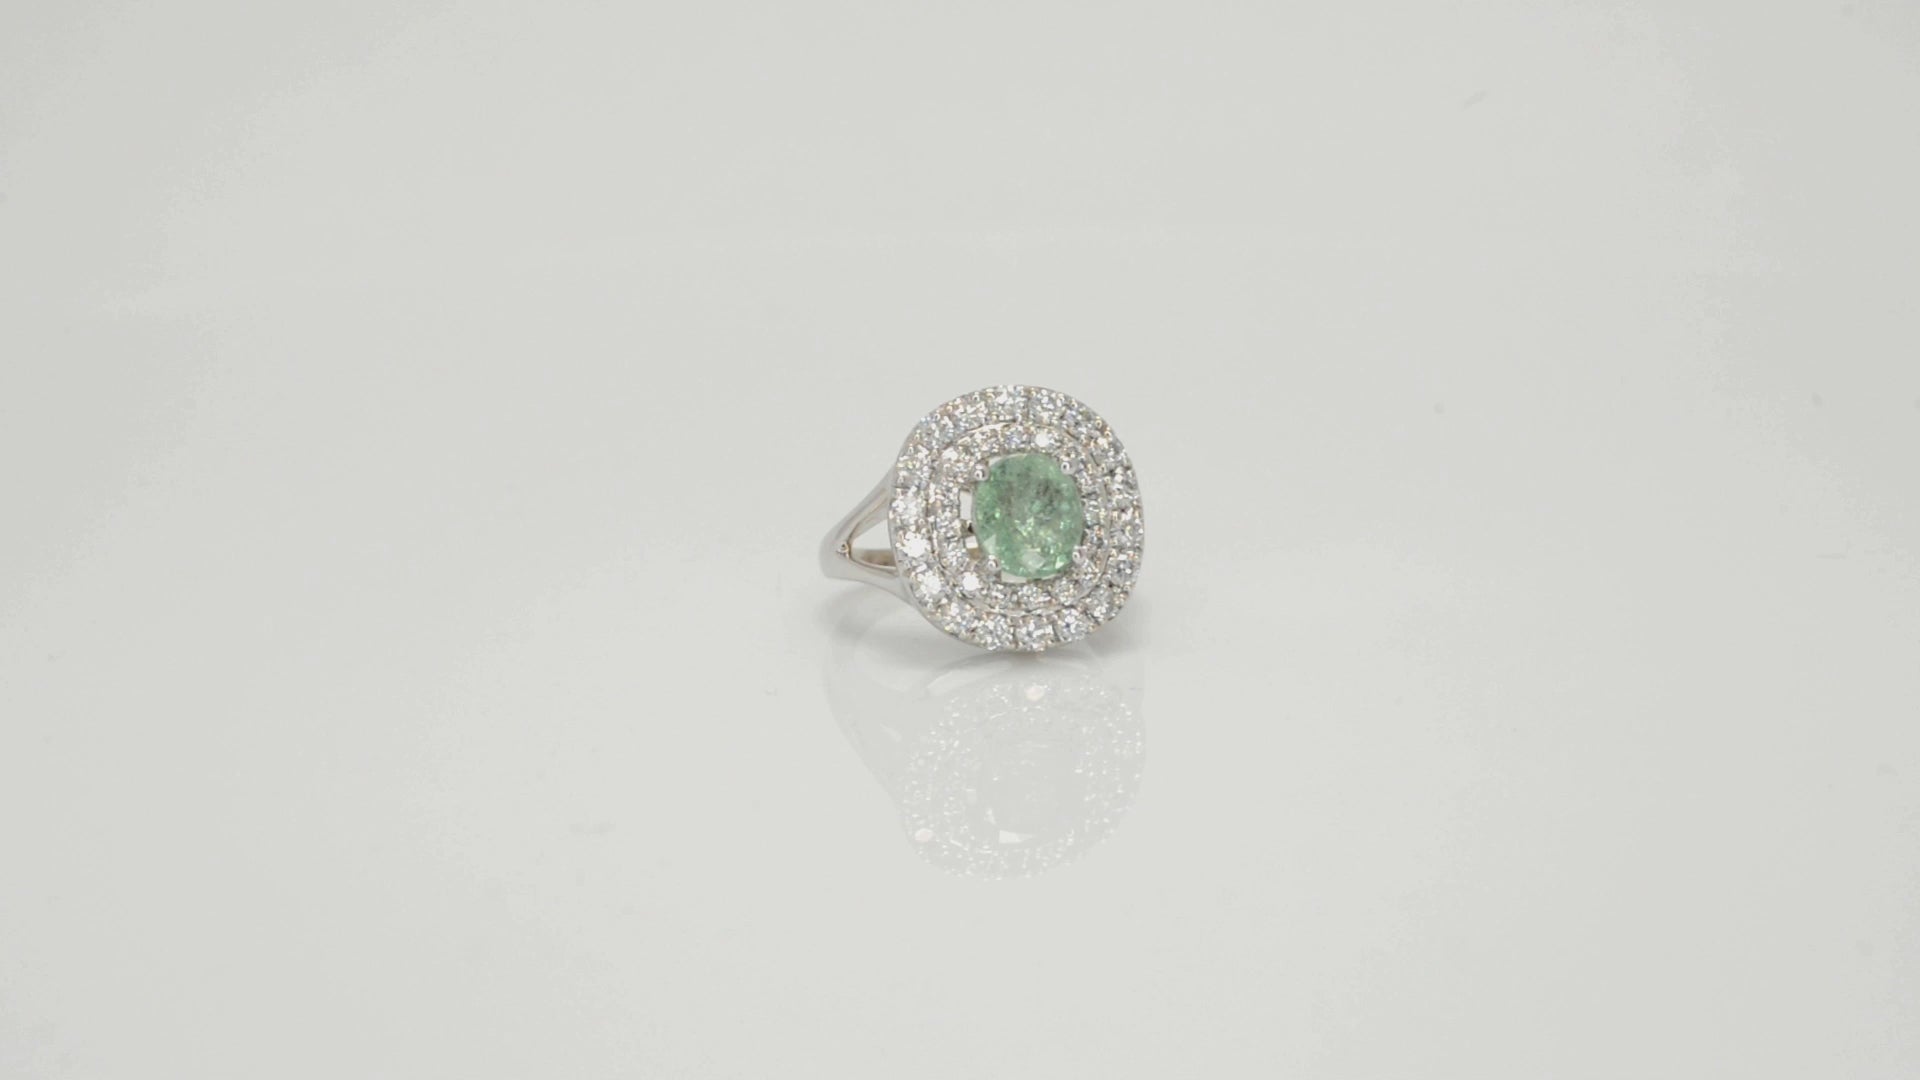 A sparkling cushion cut, natural paraiba tourmaline ring surrounded by 2 halos of diamonds.